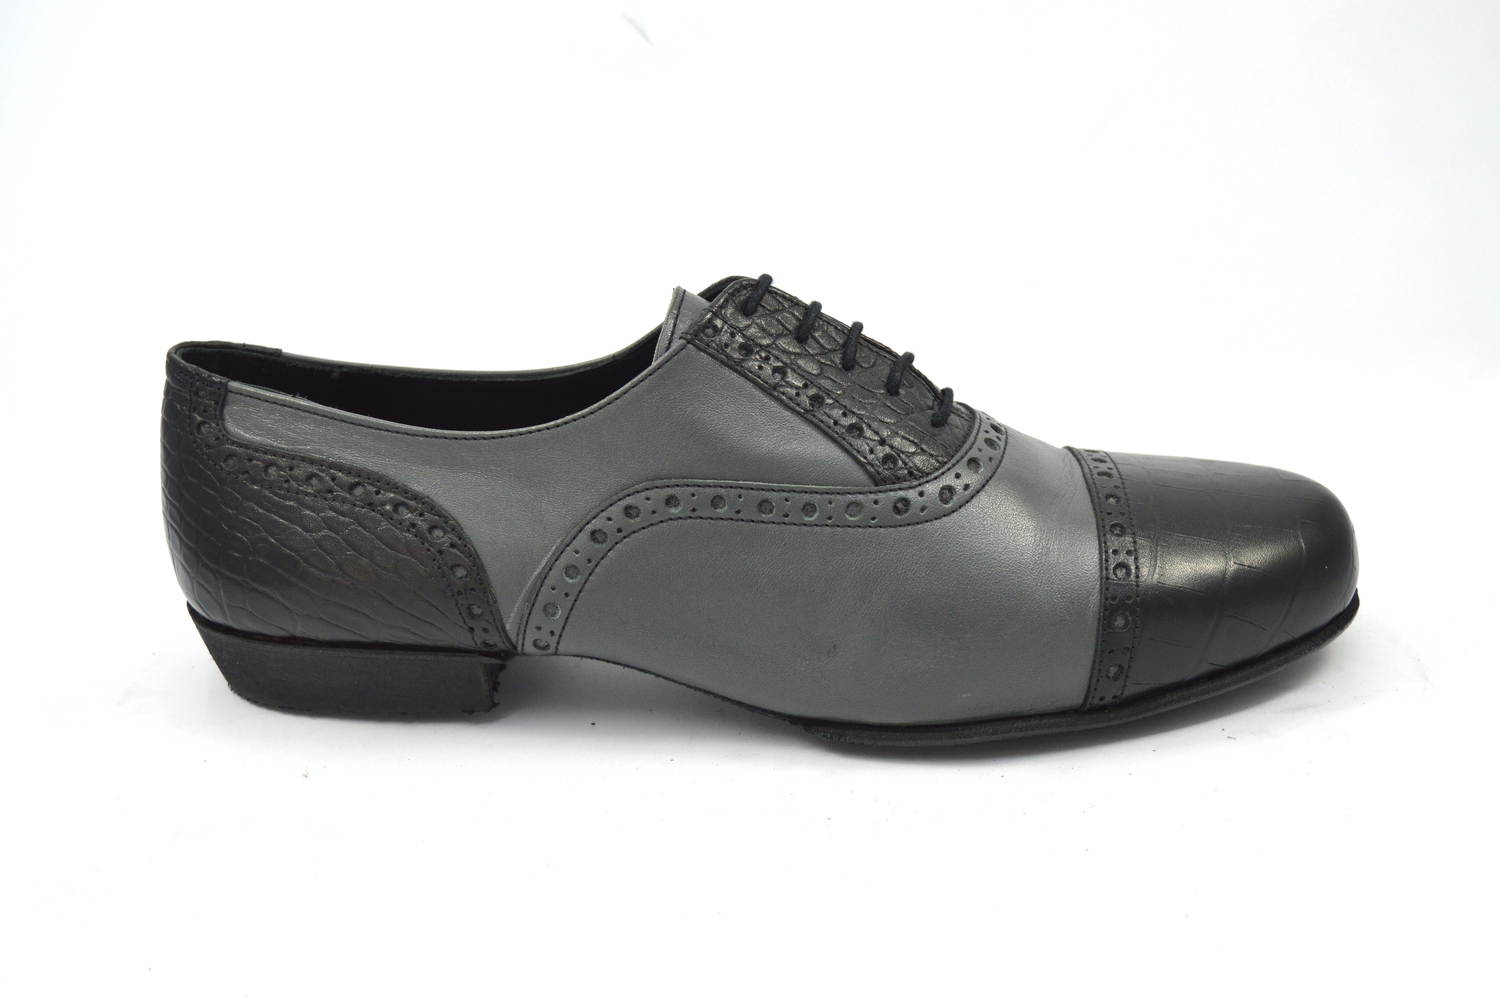 Men tango shoe by soft black and grey leather